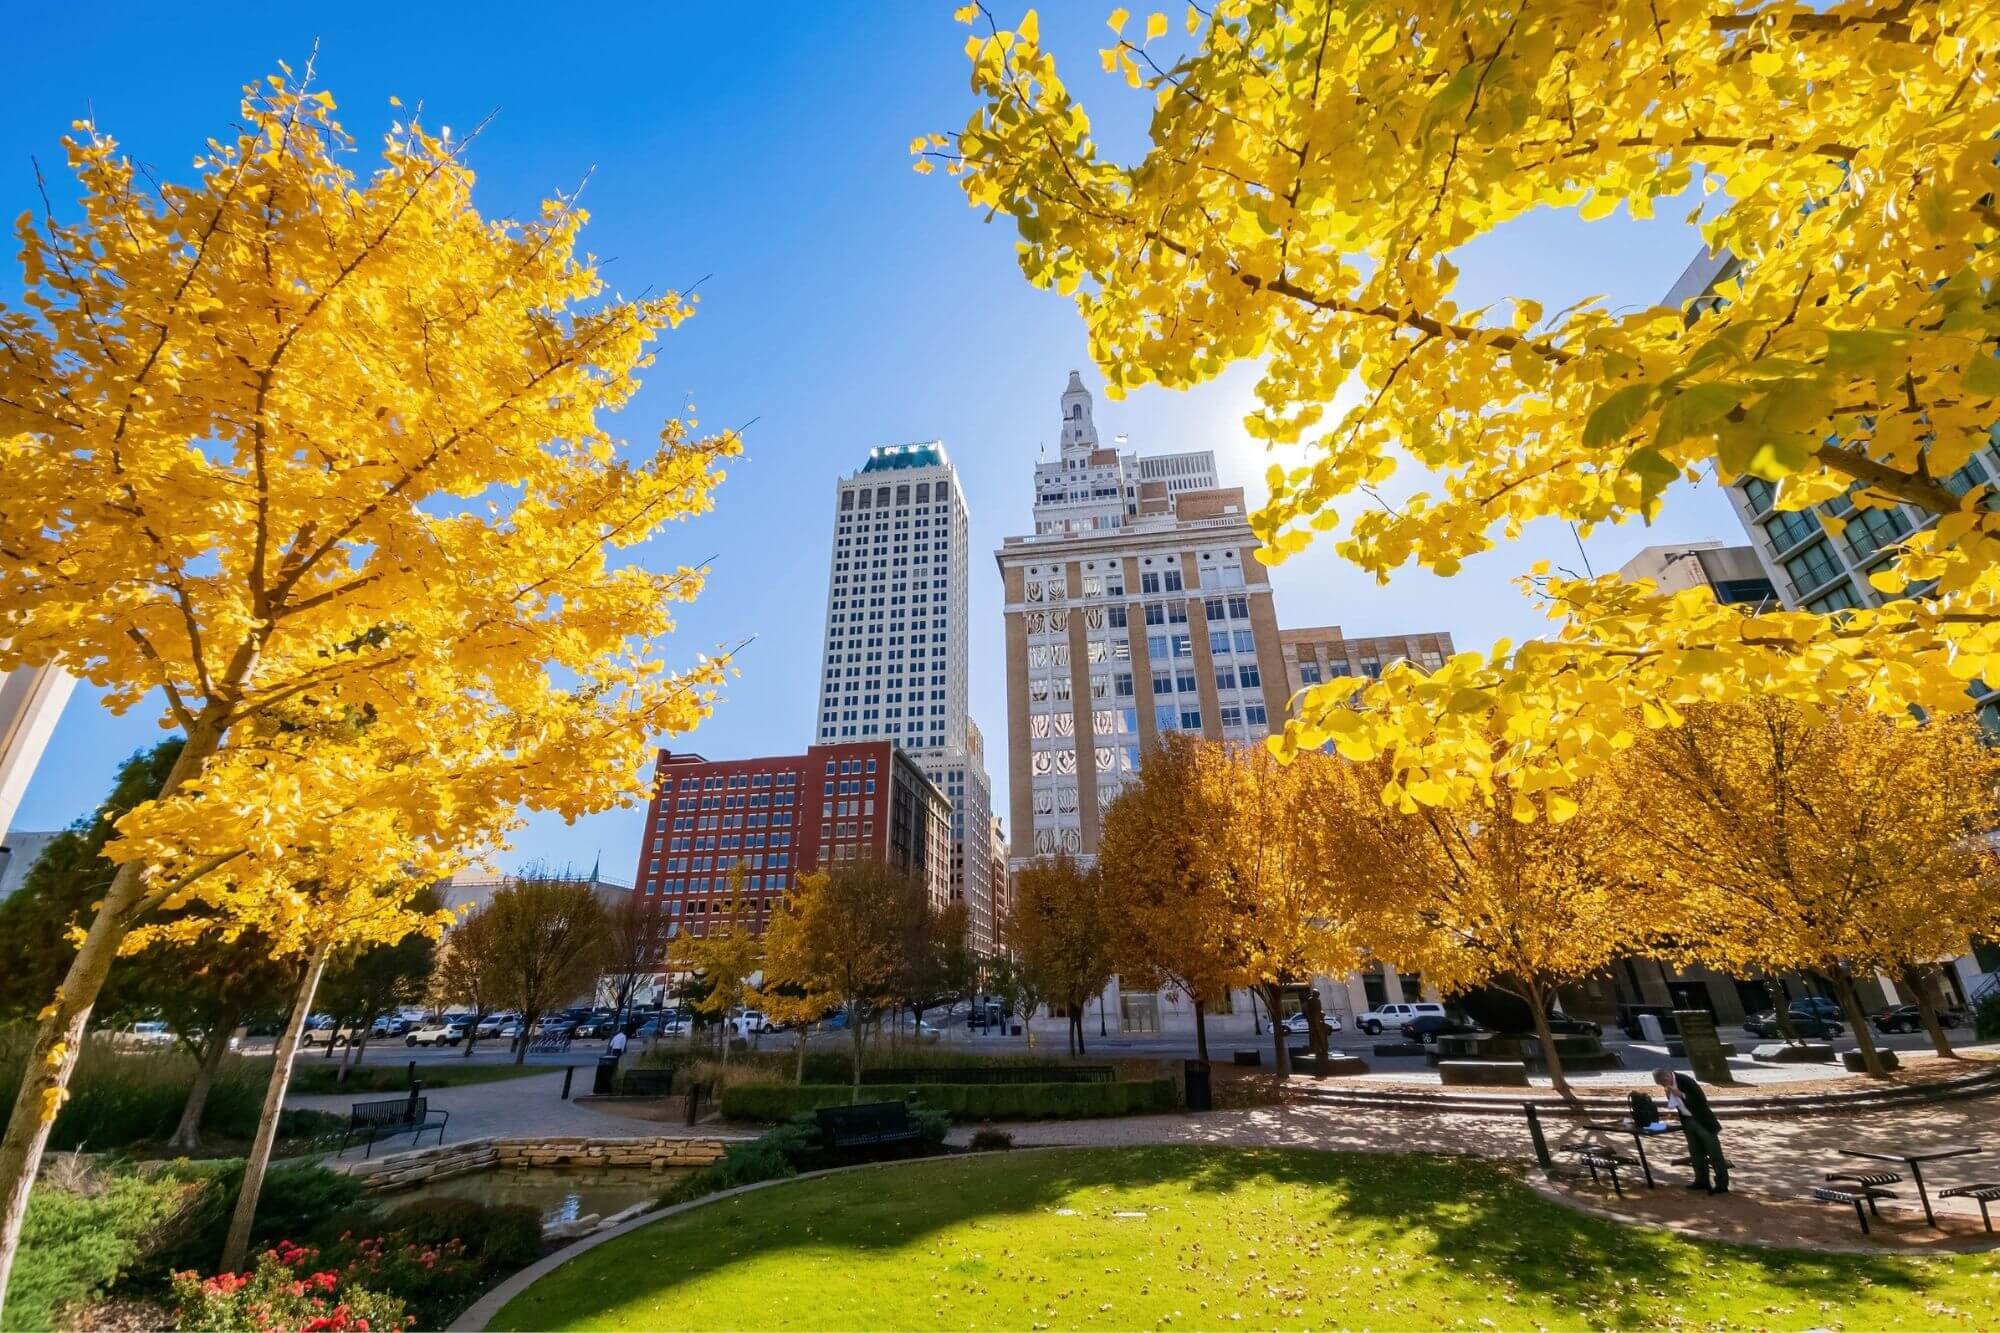 Top 10 Things to Do in Tulsa, Oklahoma